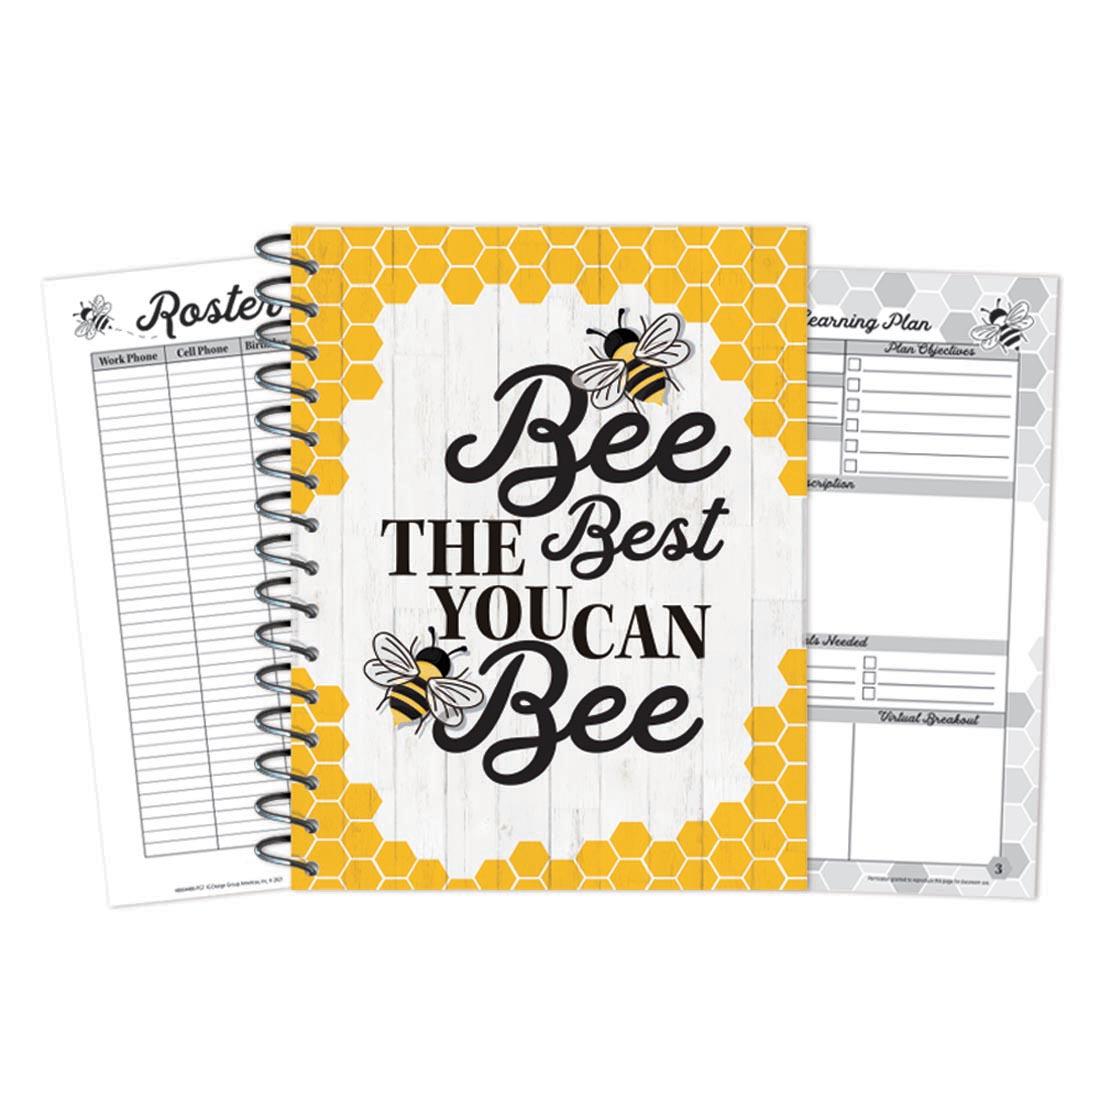 Bee the Best You Can Bee Lesson Plan & Record Book from The Hive collection by Eureka